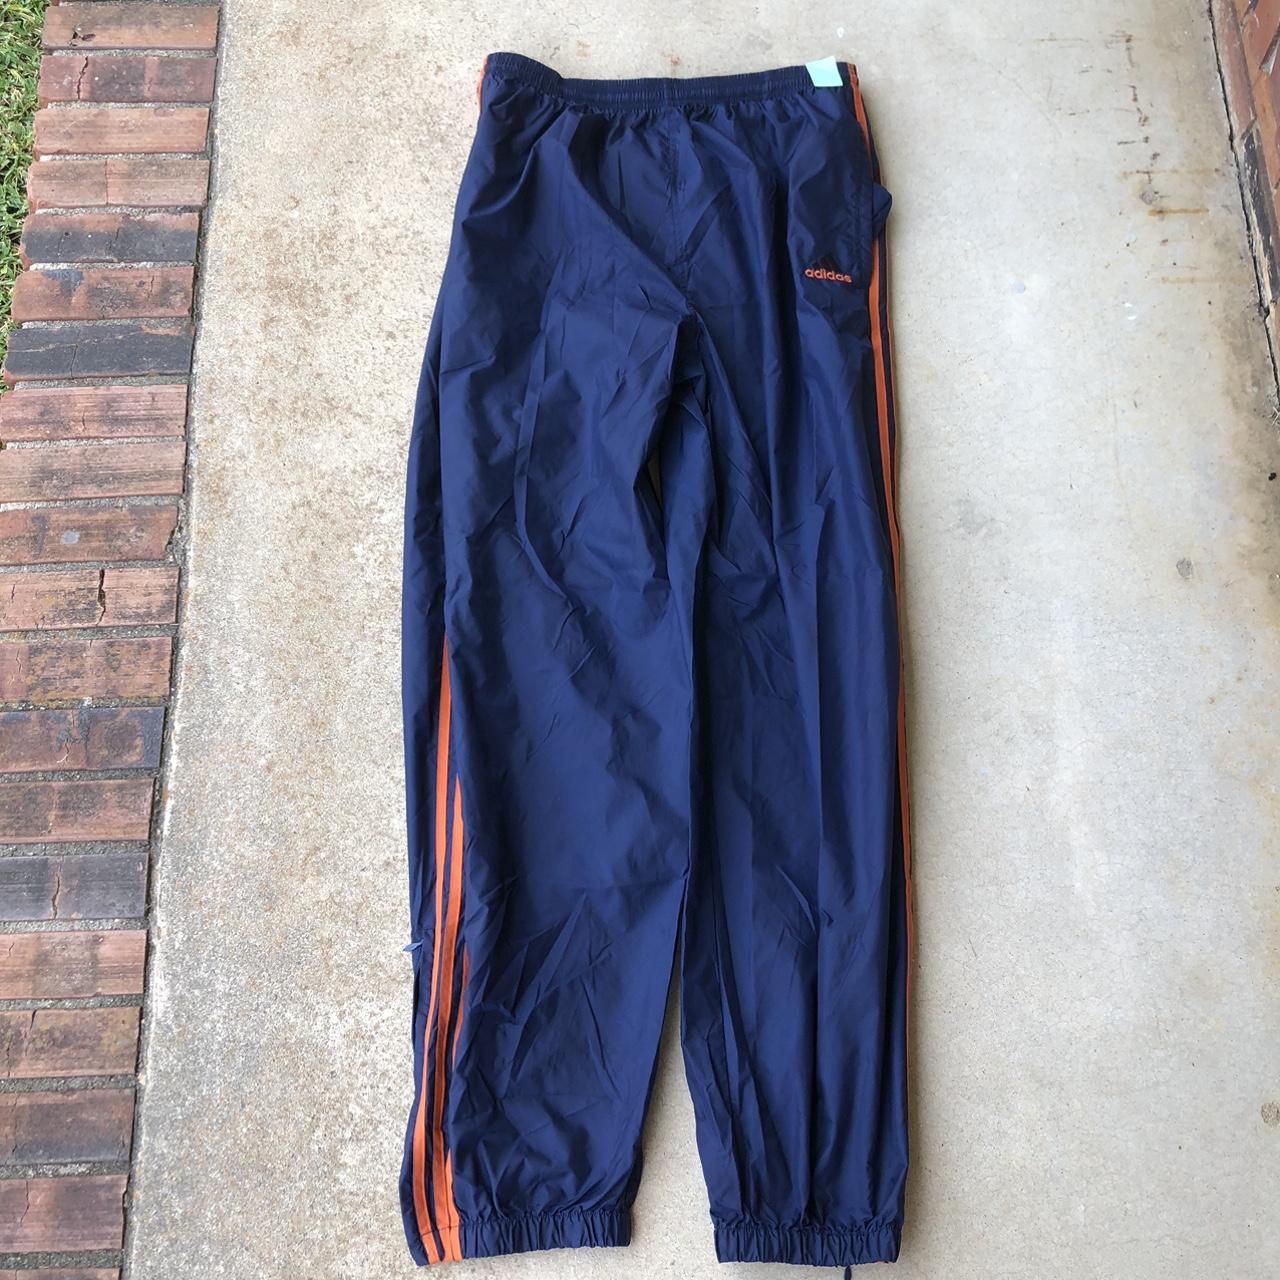 Adidas Men's Navy and Orange Joggers-tracksuits